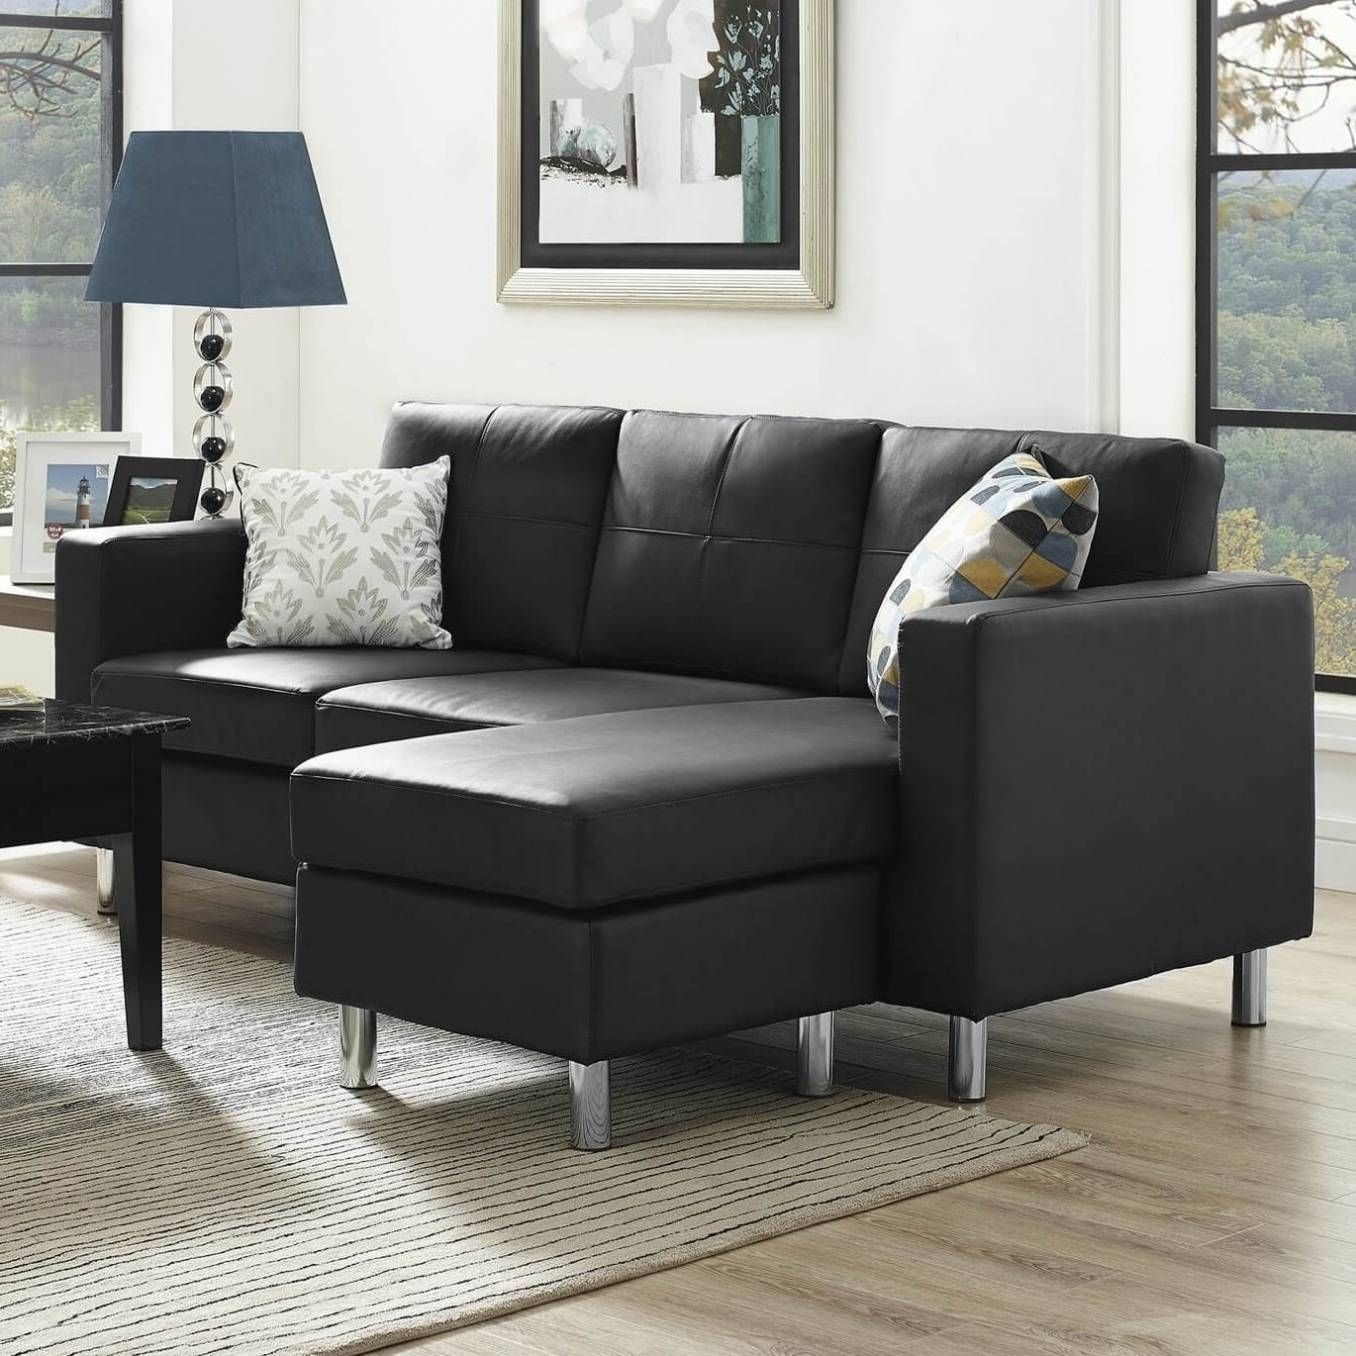 Djrrr | Sofas Ideas Throughout Sectional Sofas Under  (View 27 of 30)